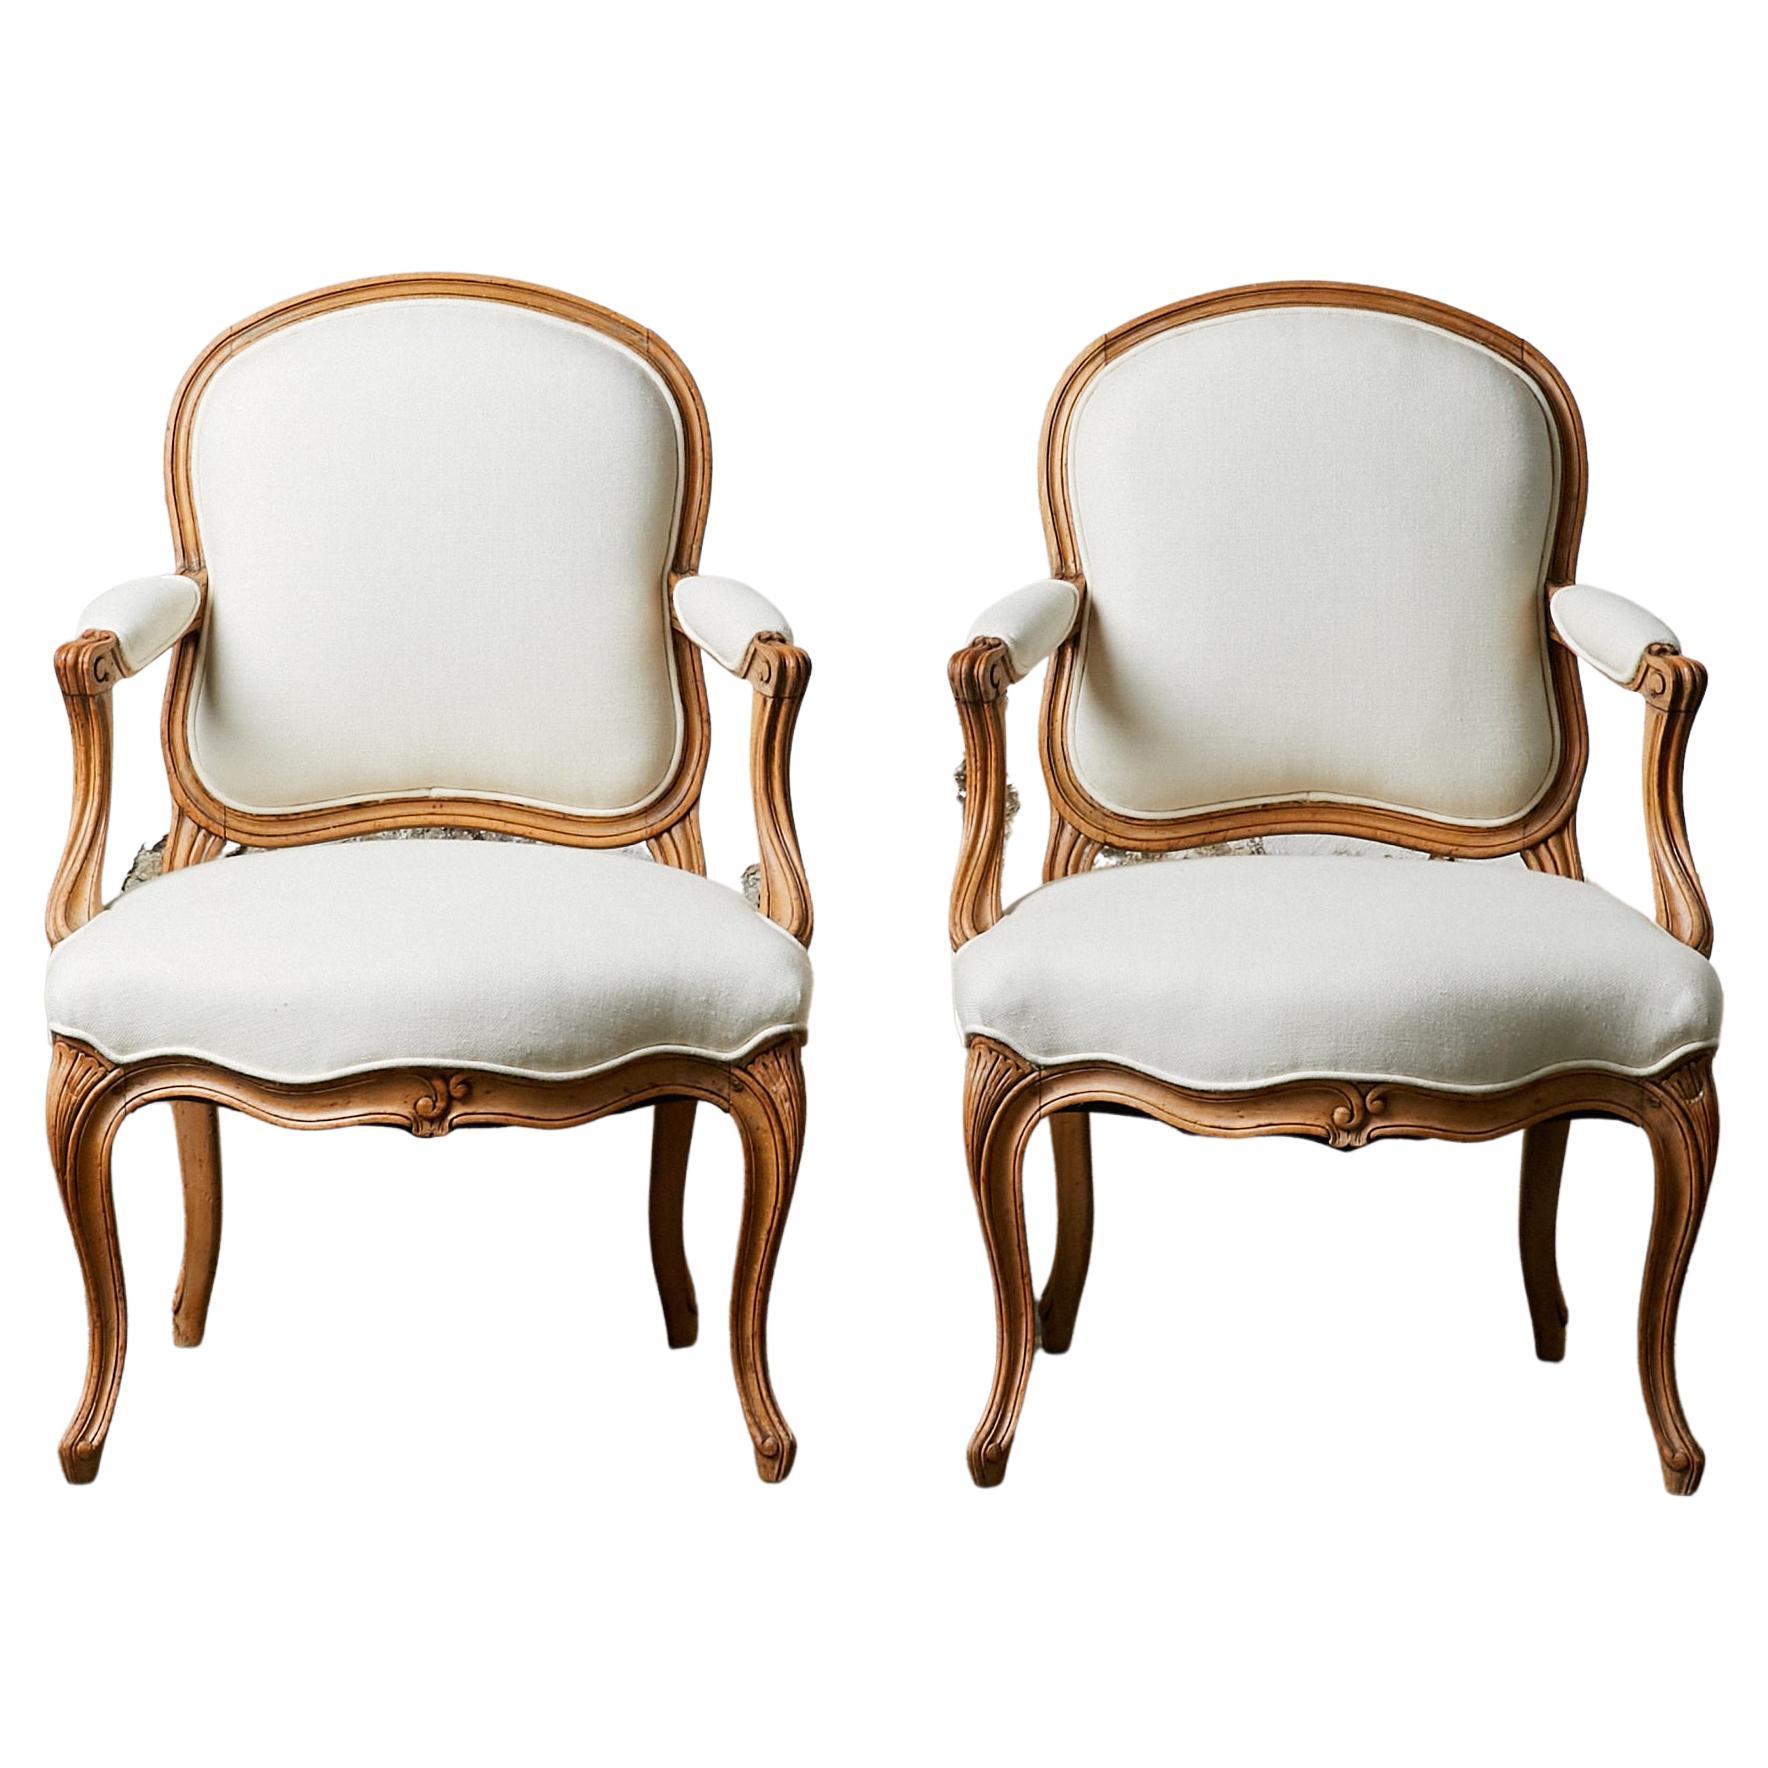 Pair of Louis XV Style Arm Chairs